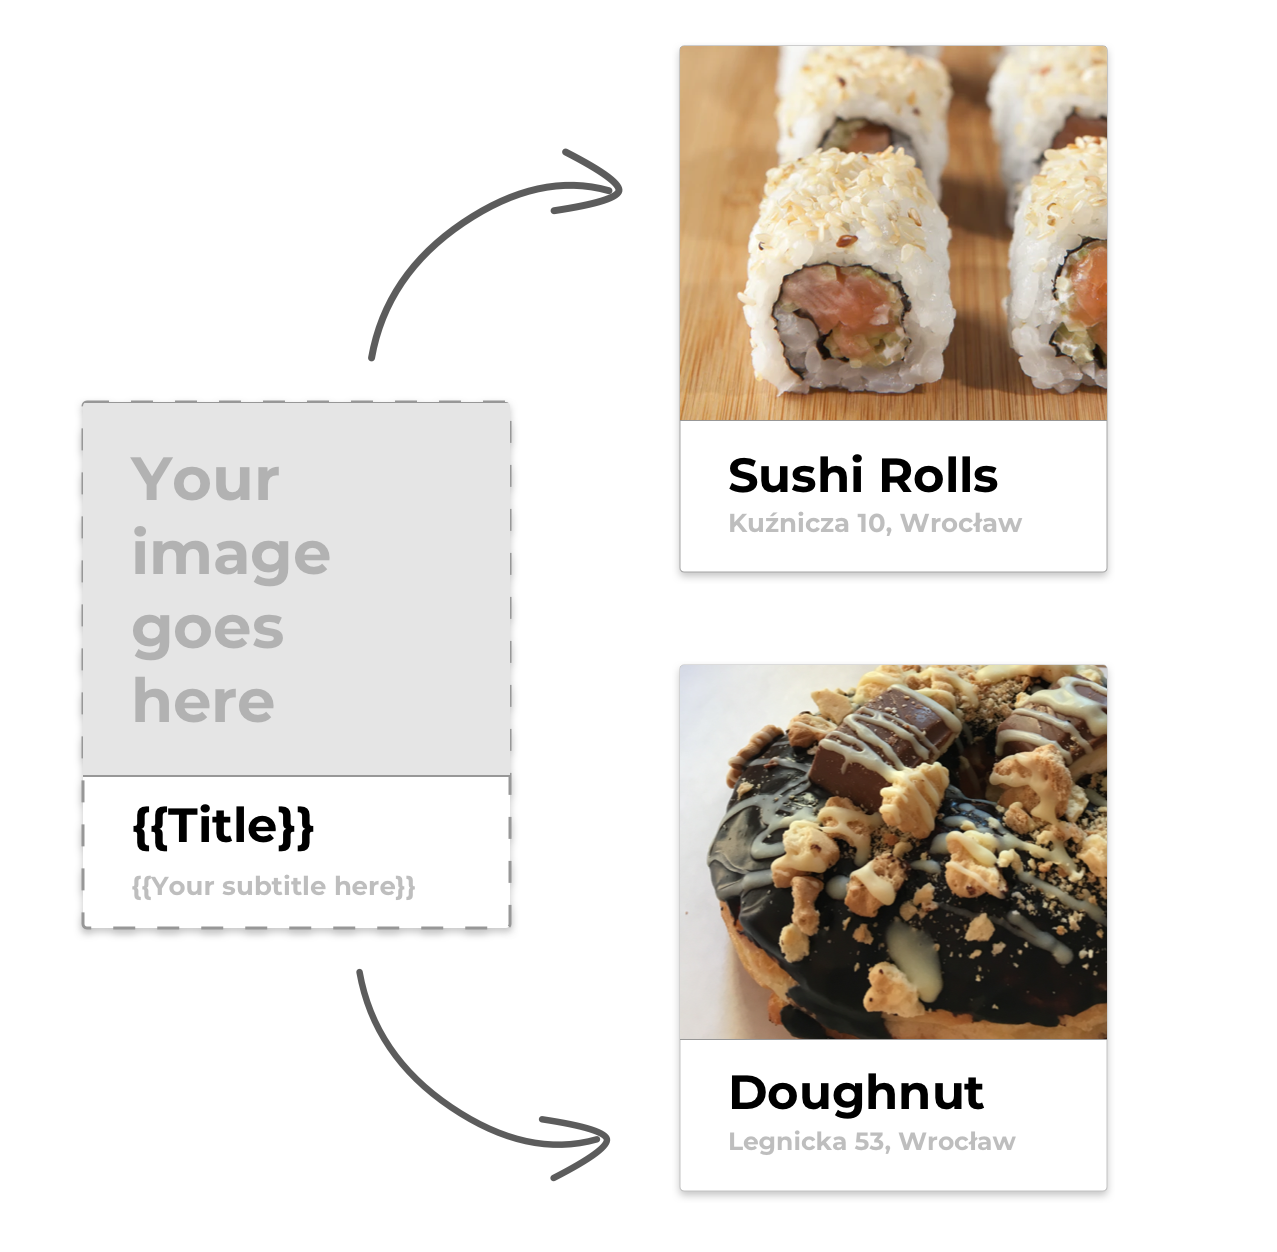 create images using api based on template